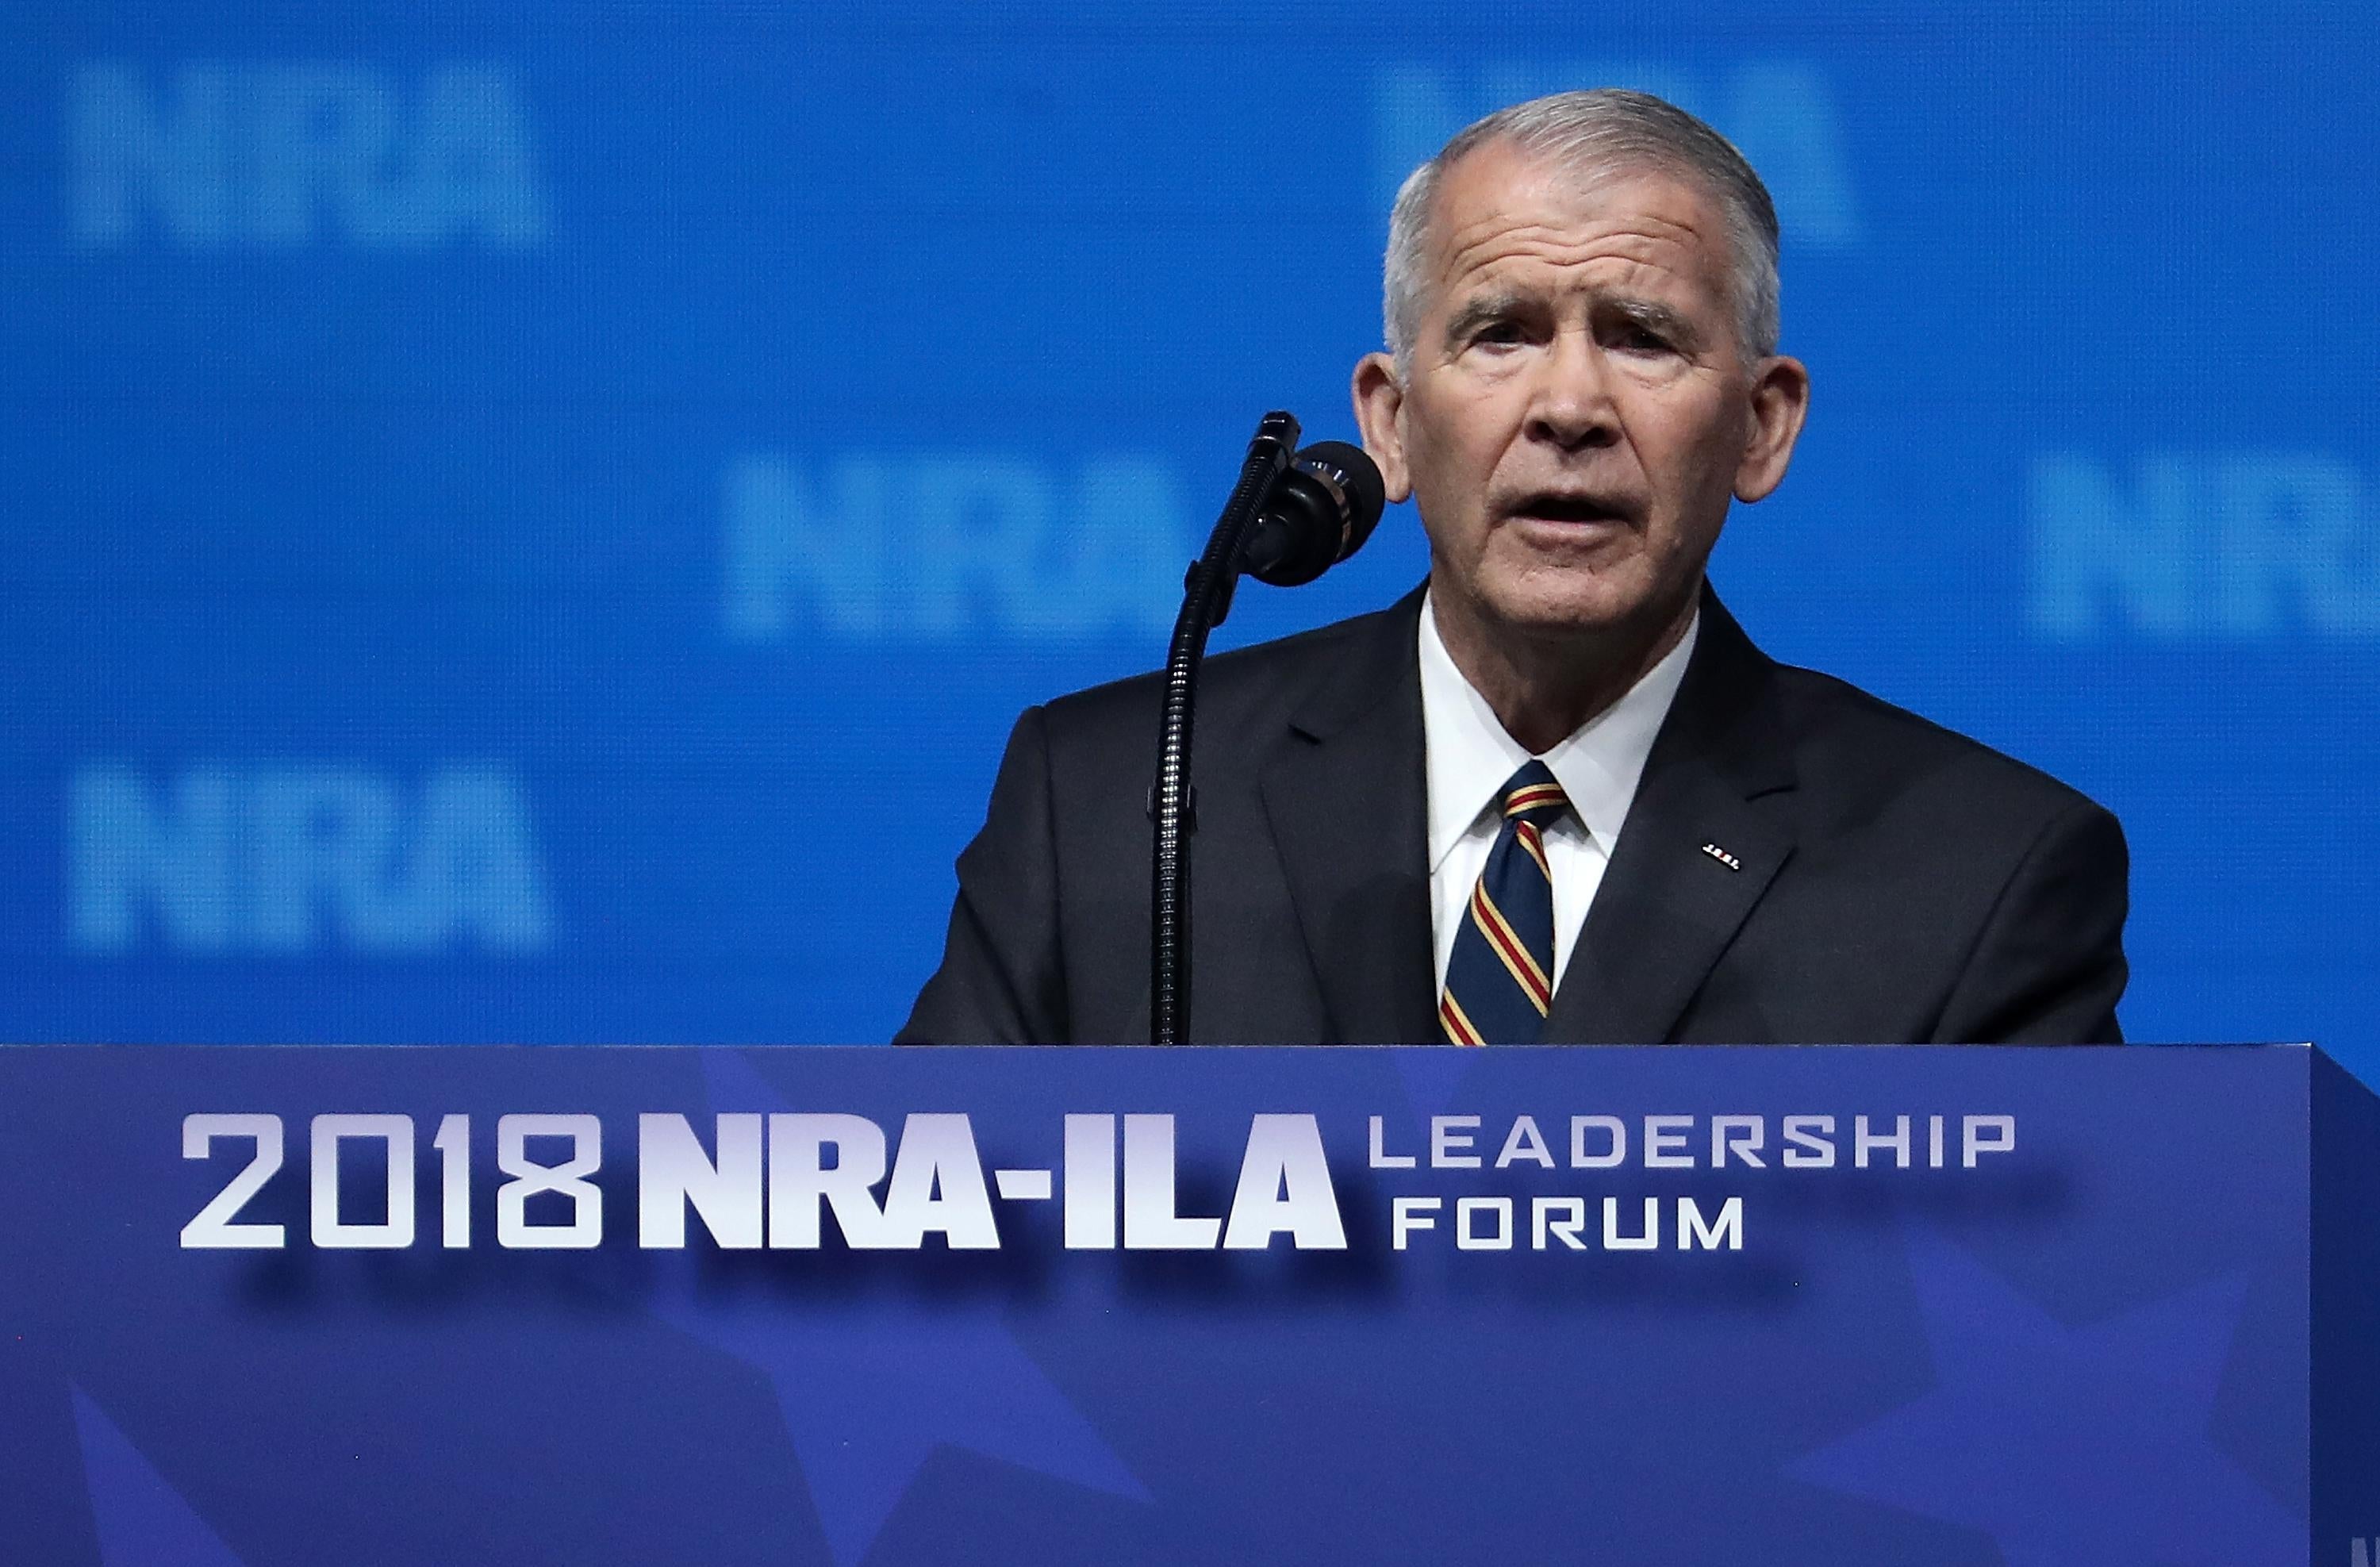 Oliver North speaks at the NRA-ILA Leadership Forum during the NRA Annual Meeting & Exhibits at the Kay Bailey Hutchison Convention Center on May 4, 2018 in Dallas, Texas.